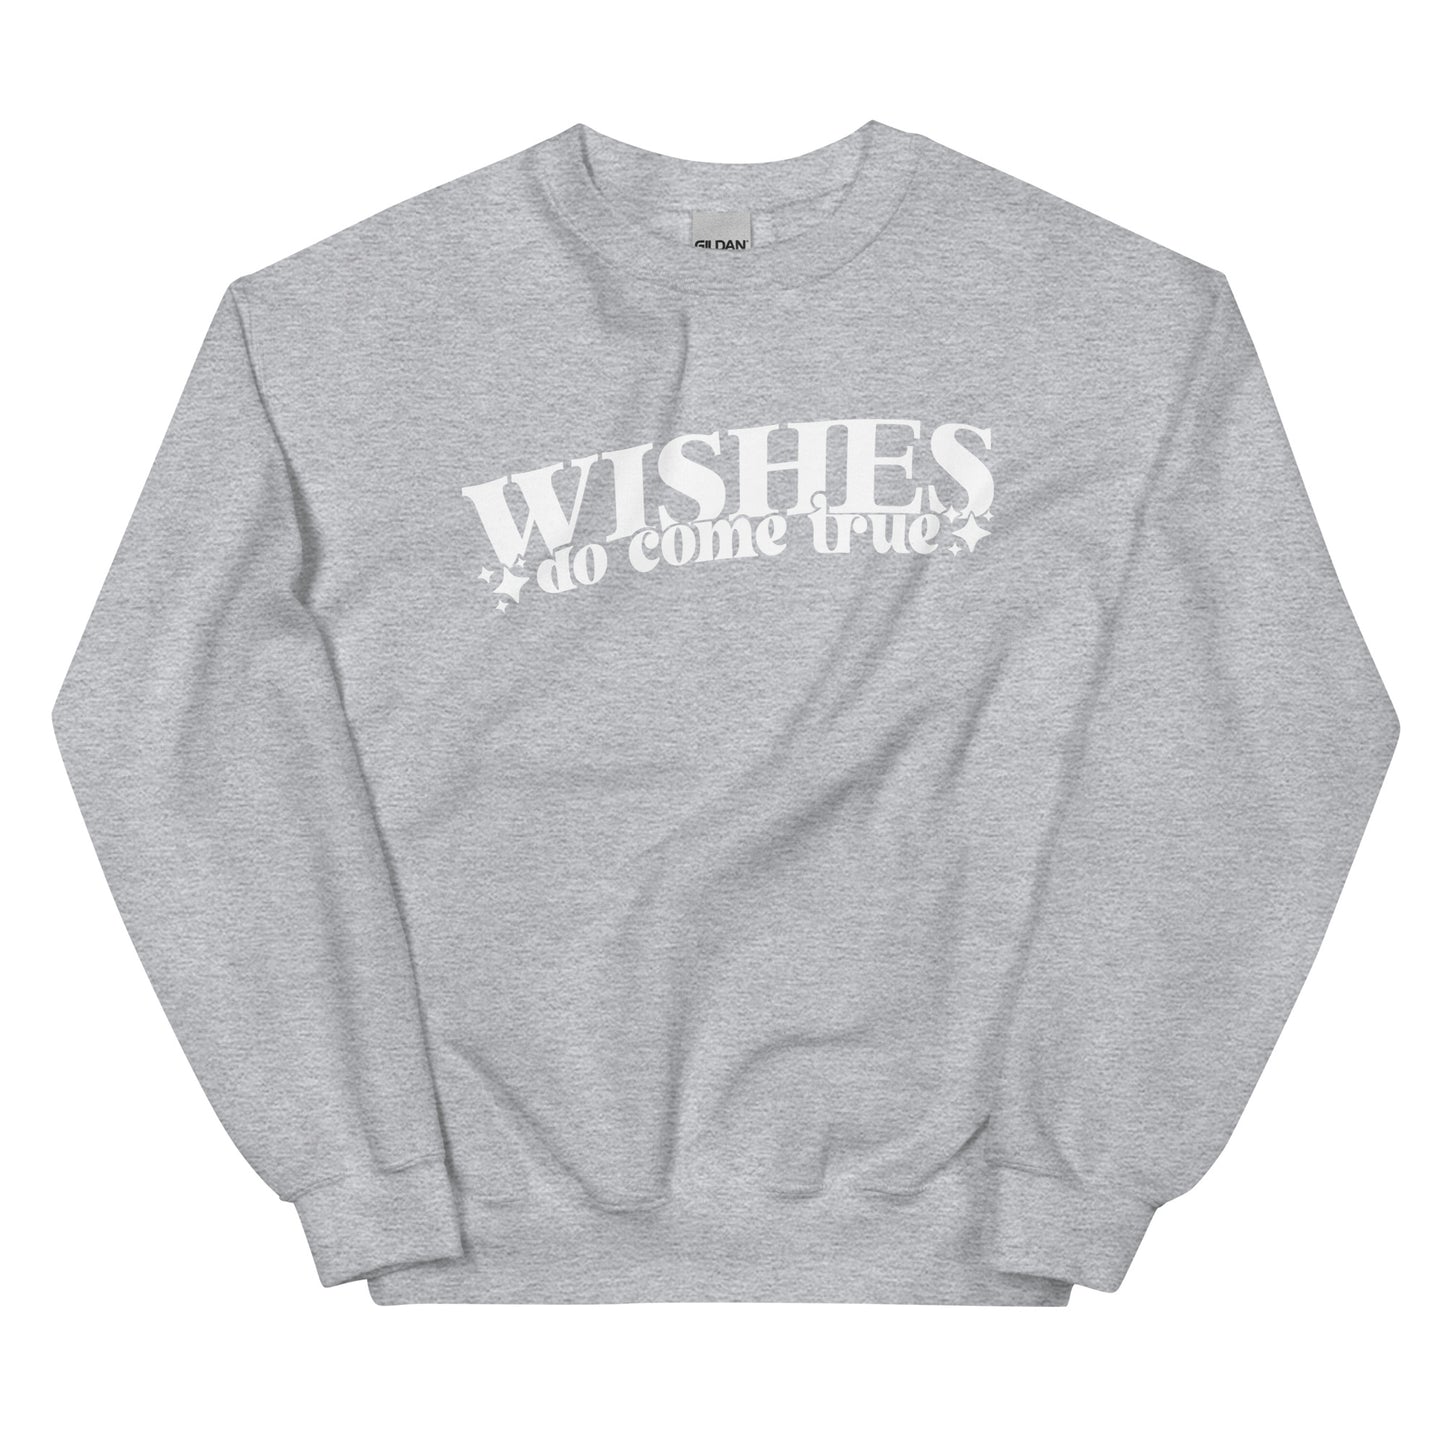 All Our Wishes Sweater